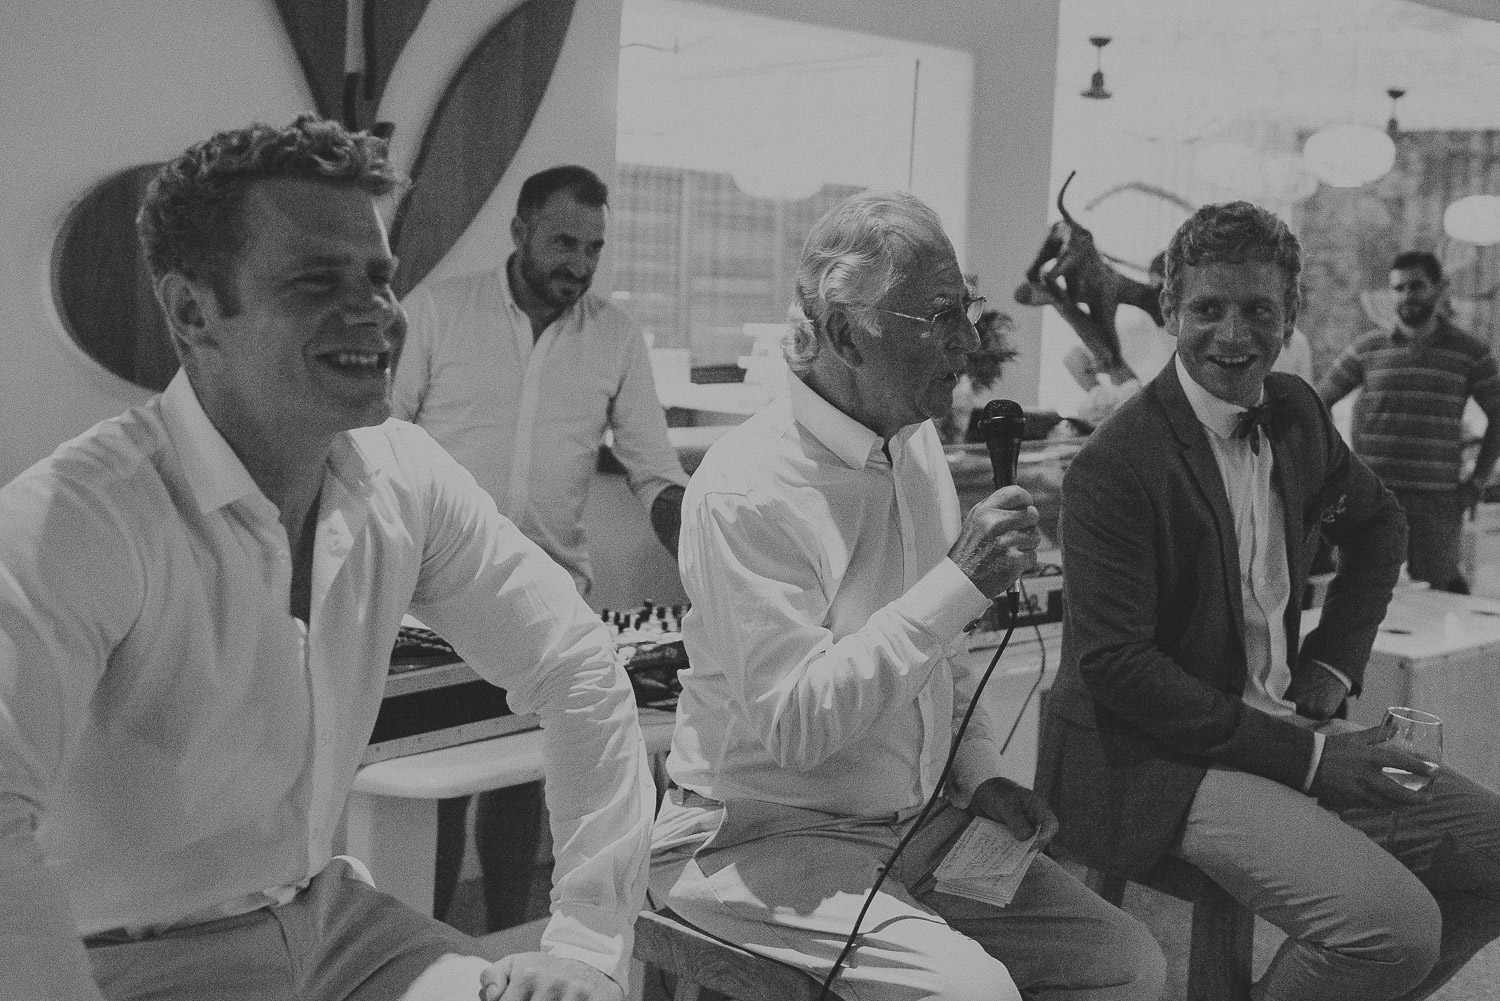 Wedding photographer Mykonos: black and white photo of the father of the bride during speeches at Elia for Mykonos wedding reception.